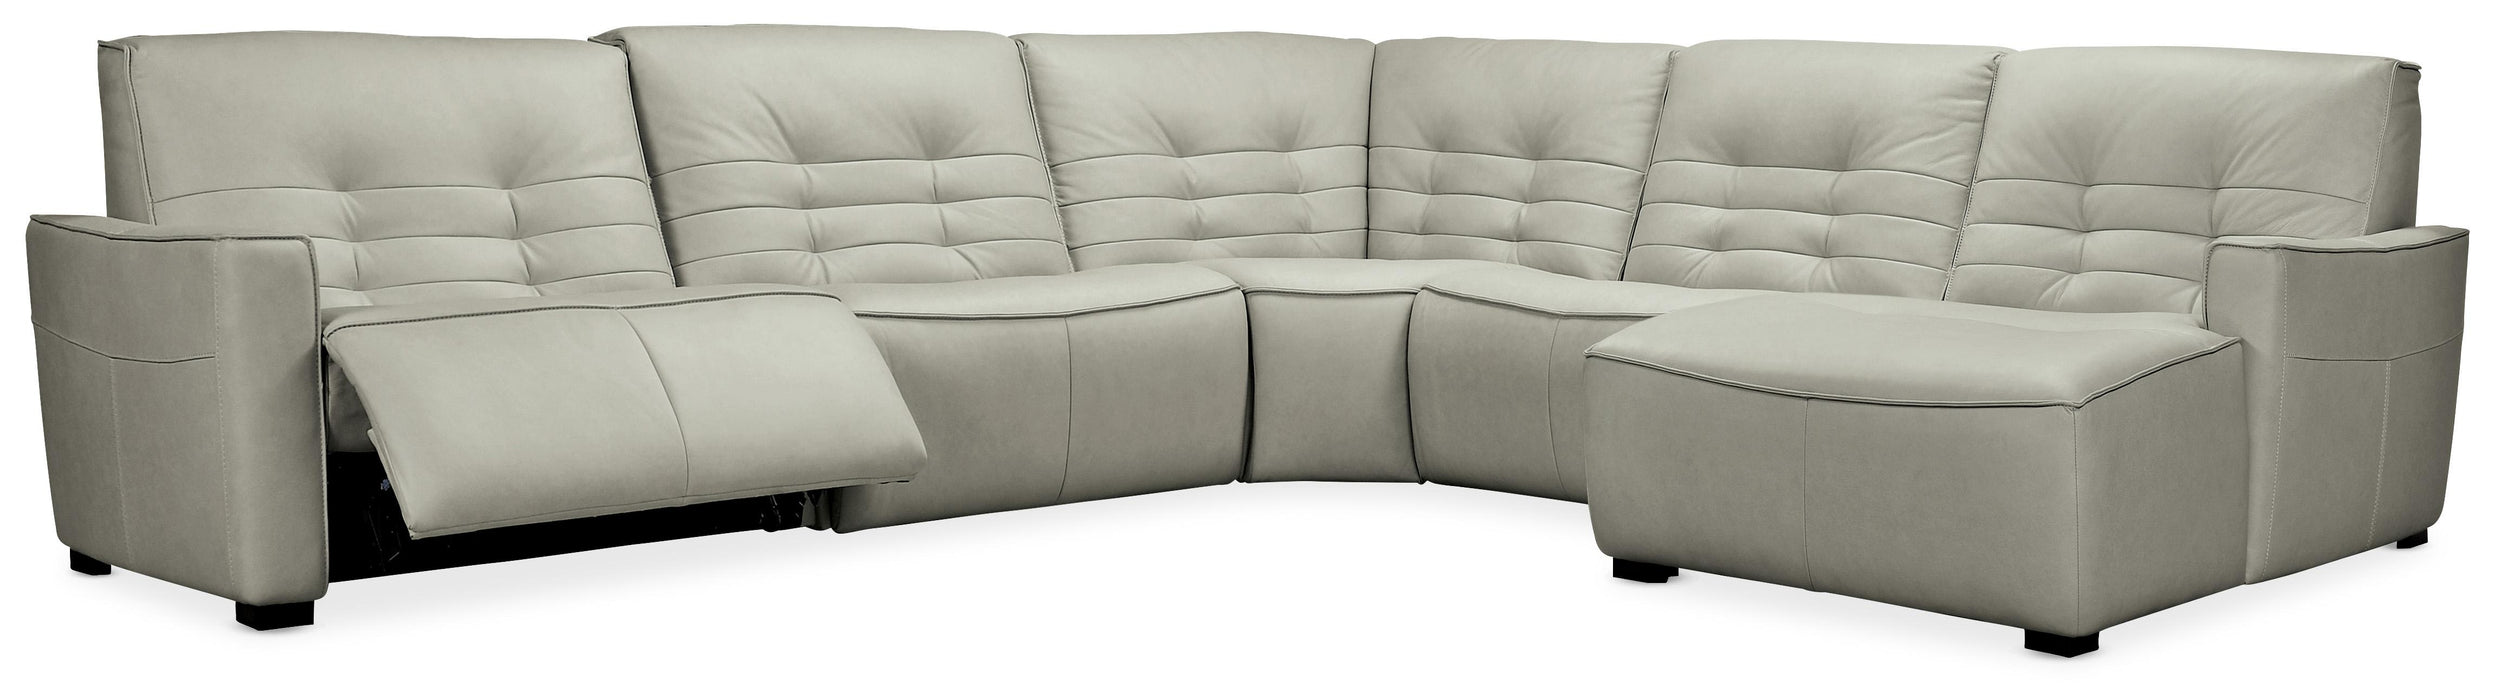 Reaux 5-Piece RAF Chaise Sectional w/2 Power Recliners image